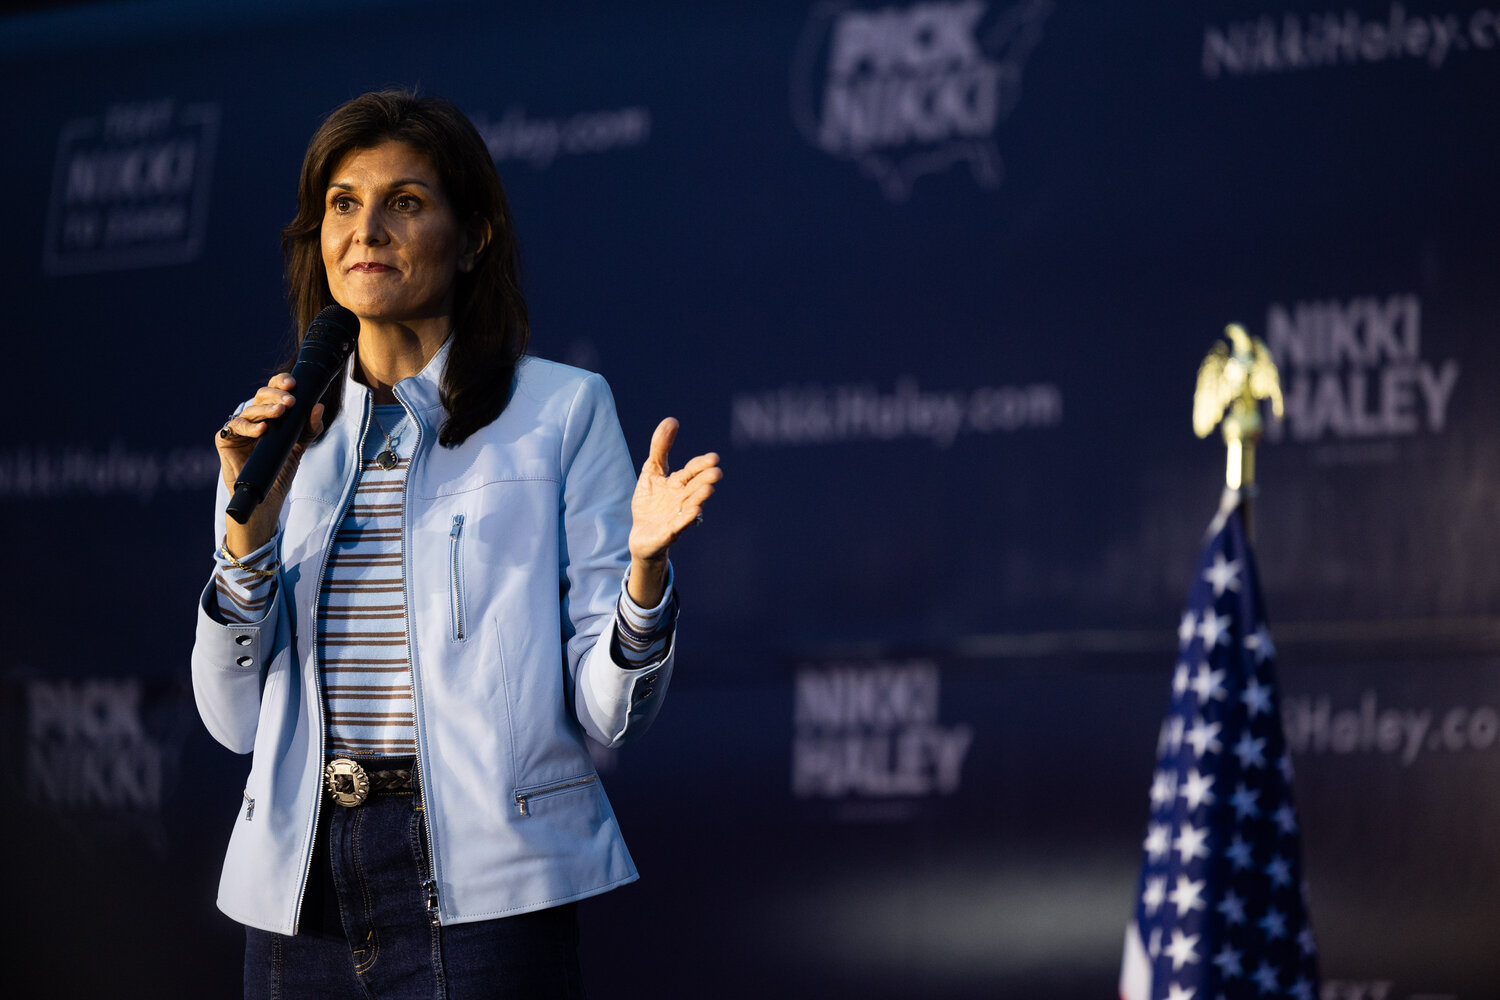 Nikki Haley brings the presidential campaign bus tour to Gilbert, SC to make her pitch to Lexington County voters. 02/10/24..Photo by Thomas Hammond for The Lexington County Chronicle.